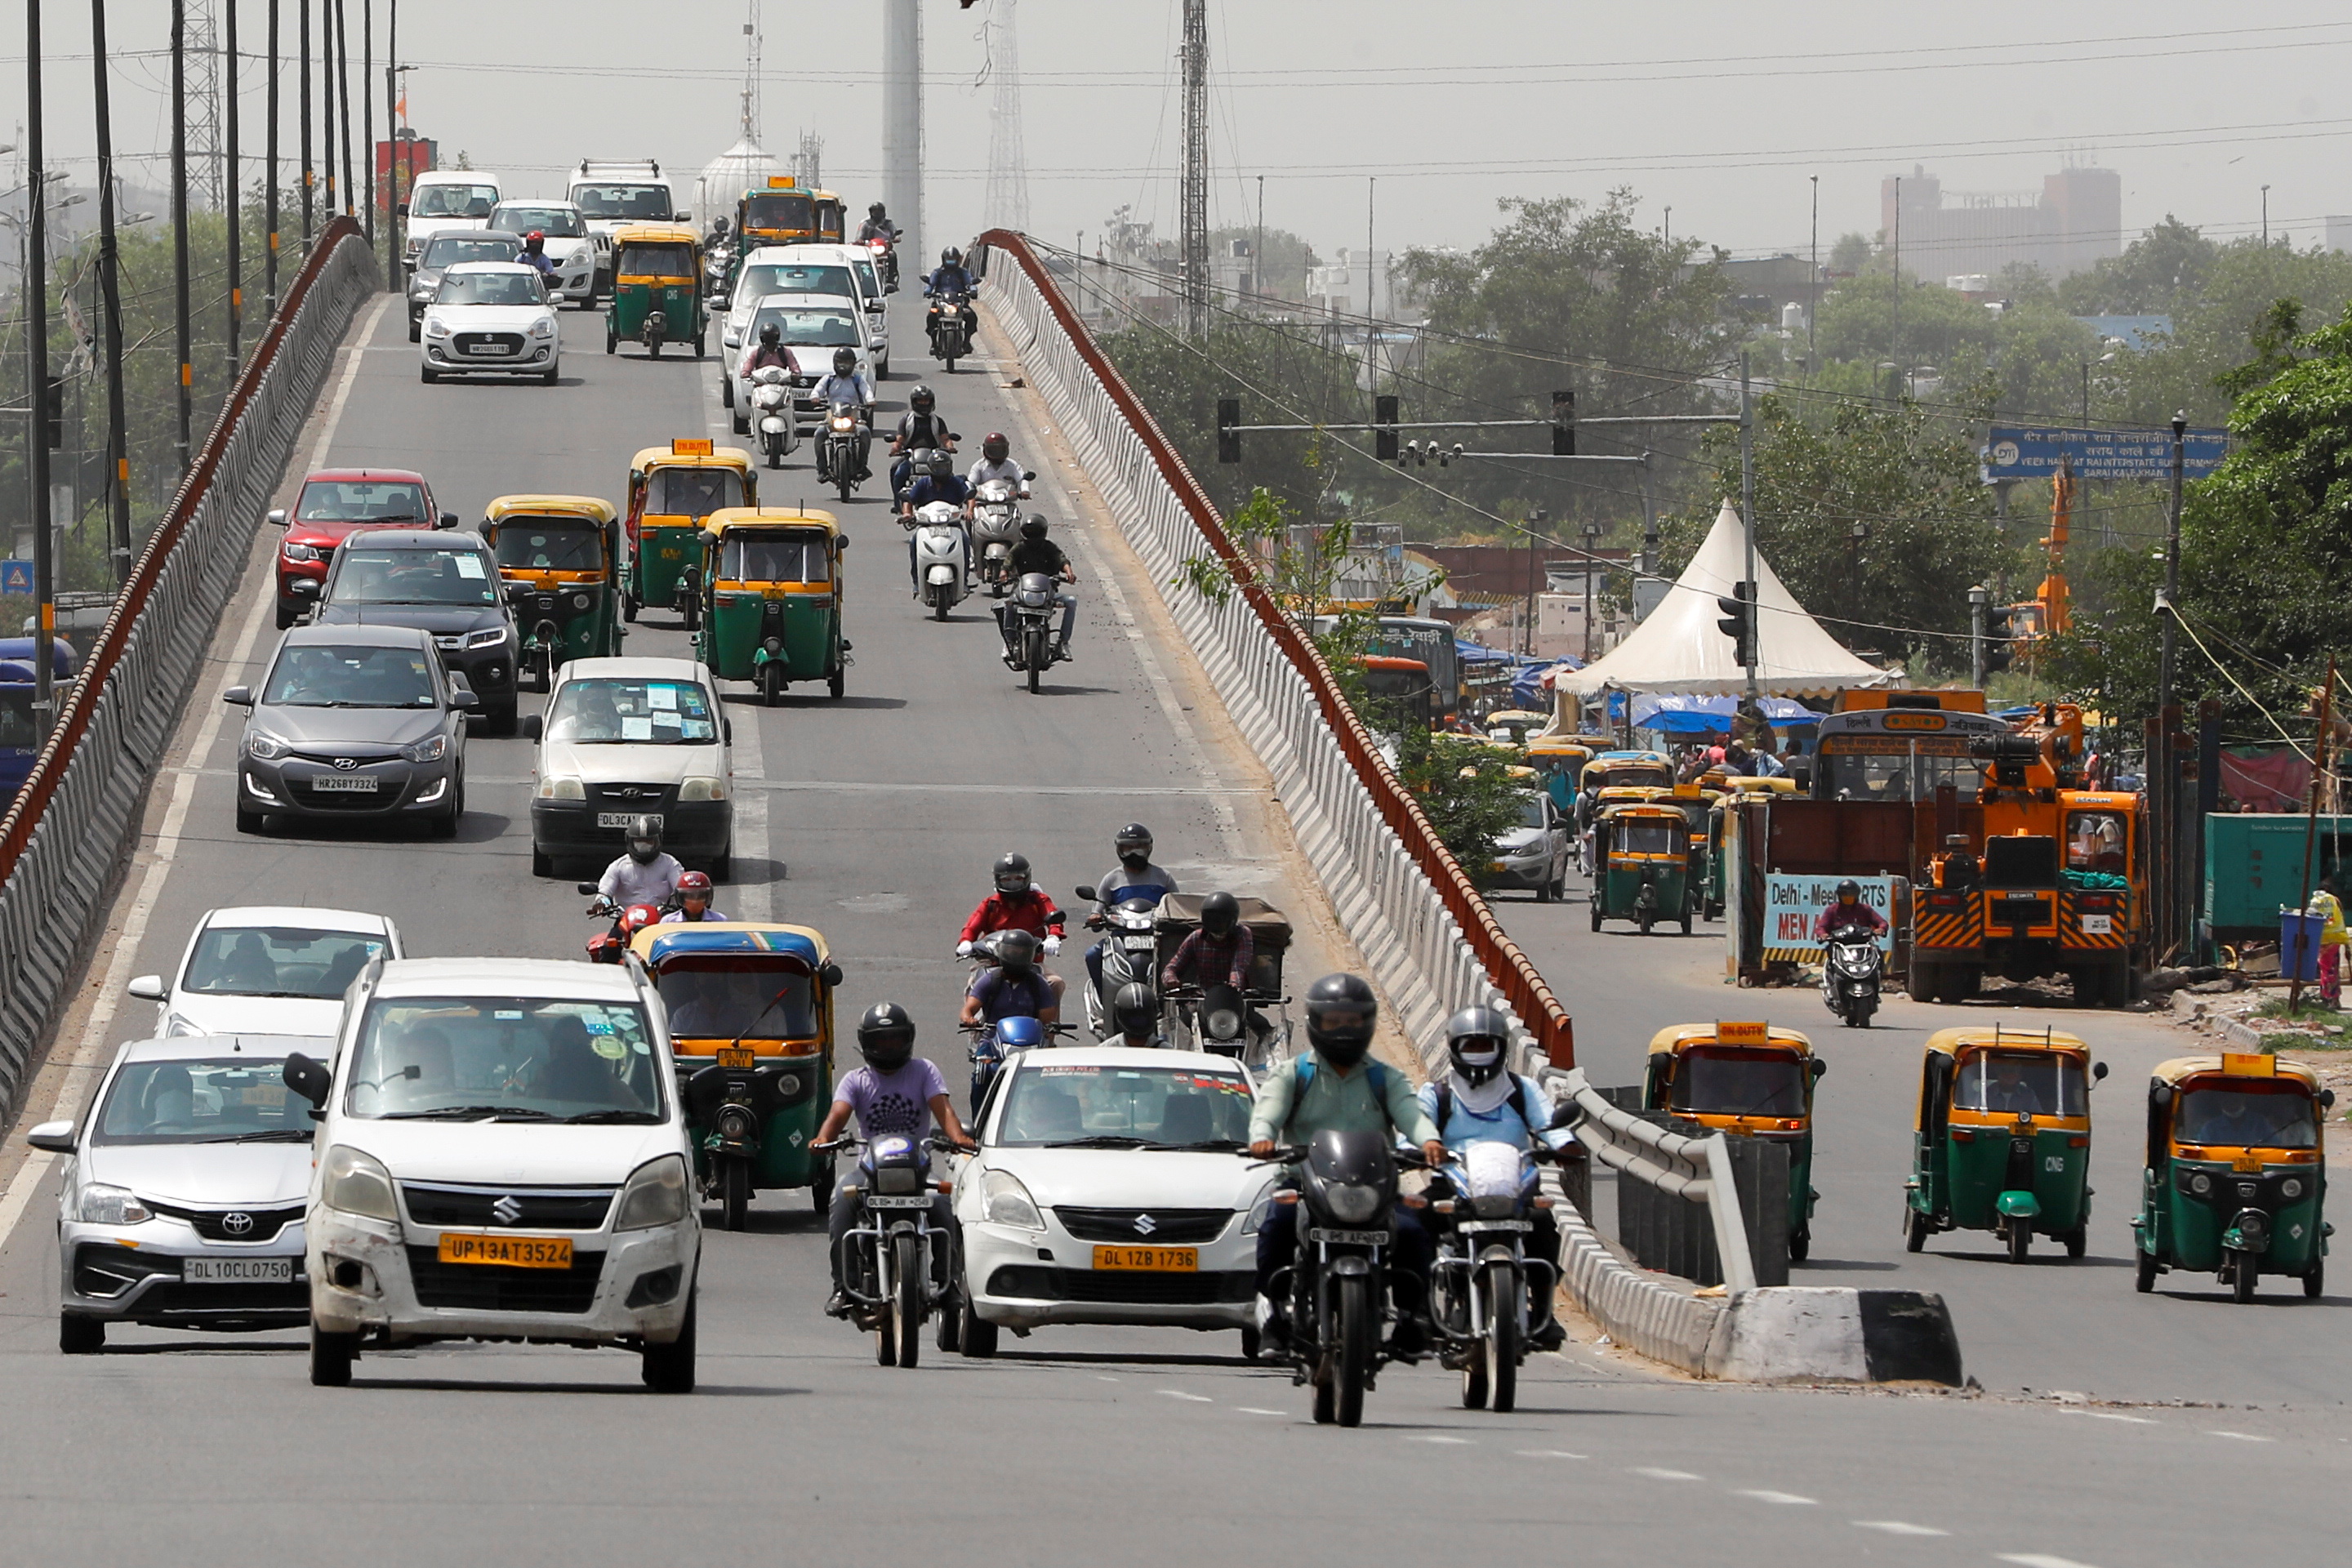 Traffic moves on a flyover, after authorities eased lockdown restrictions that were imposed to slow the spread of the coronavirus disease (COVID-19), in New Delhi, India, June 8, 2021. REUTERS/Adnan Abidi